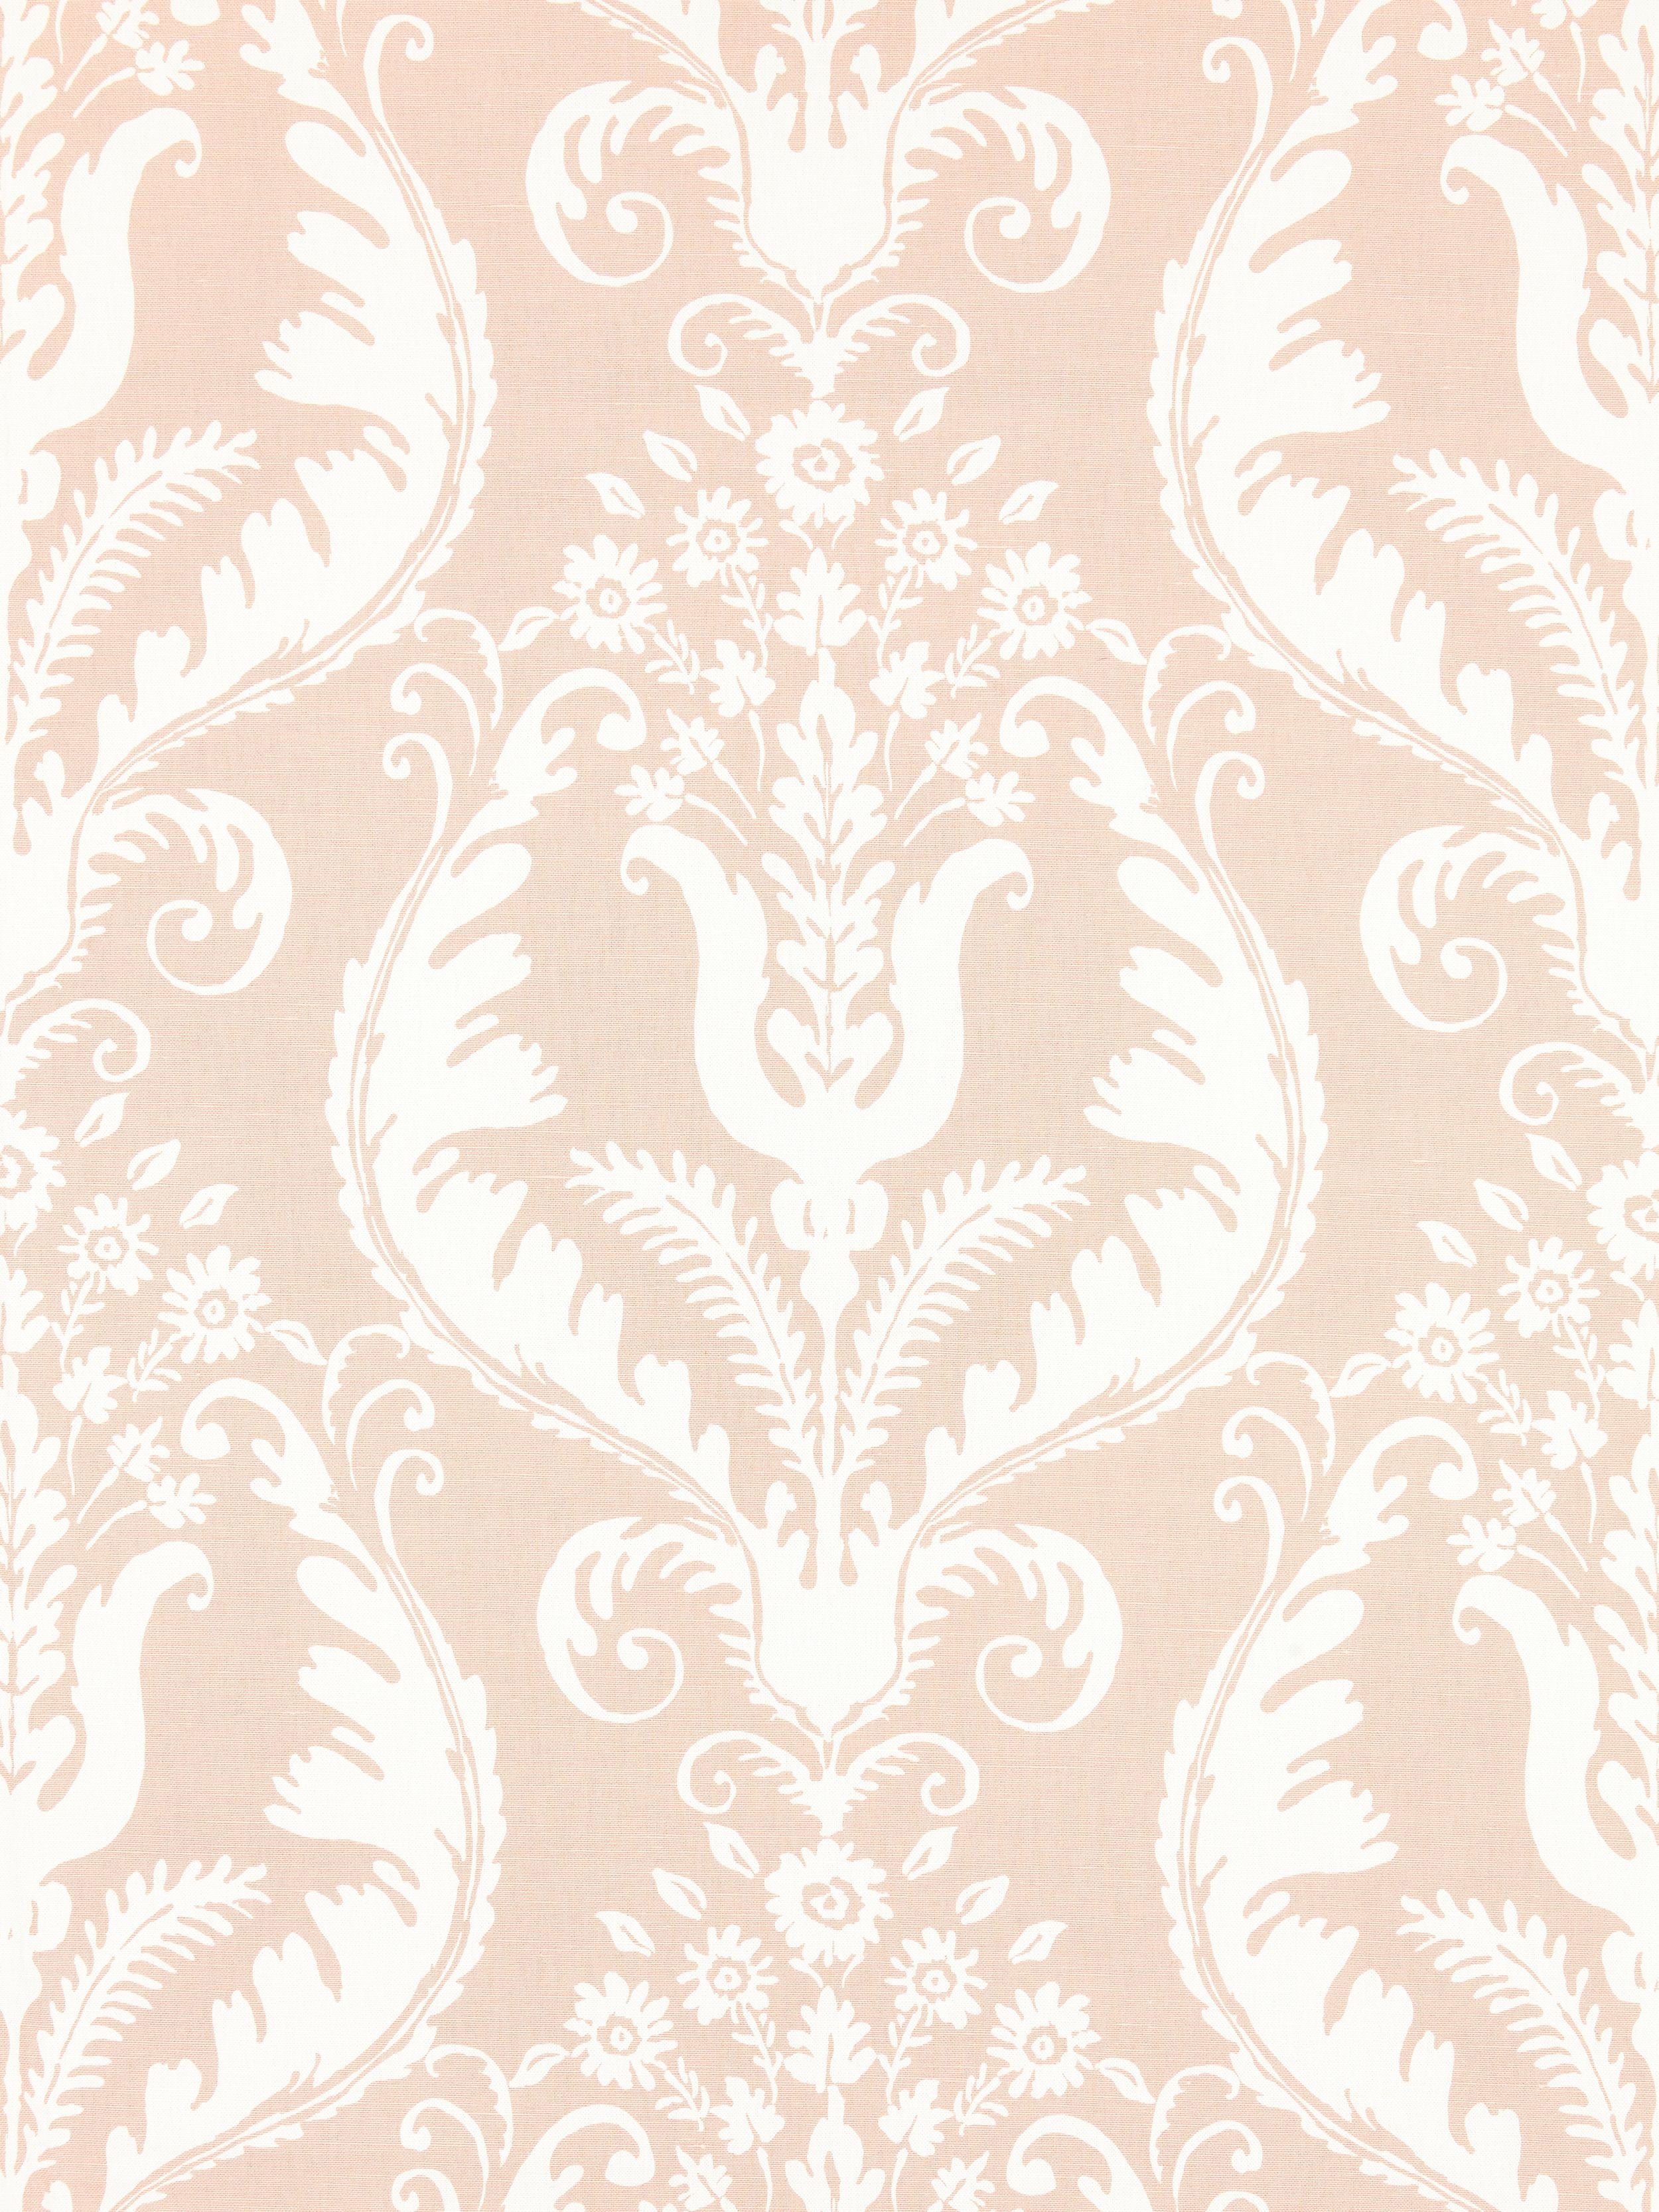 Primavera Linen Print fabric in blush color - pattern number SC 000116597 - by Scalamandre in the Scalamandre Fabrics Book 1 collection